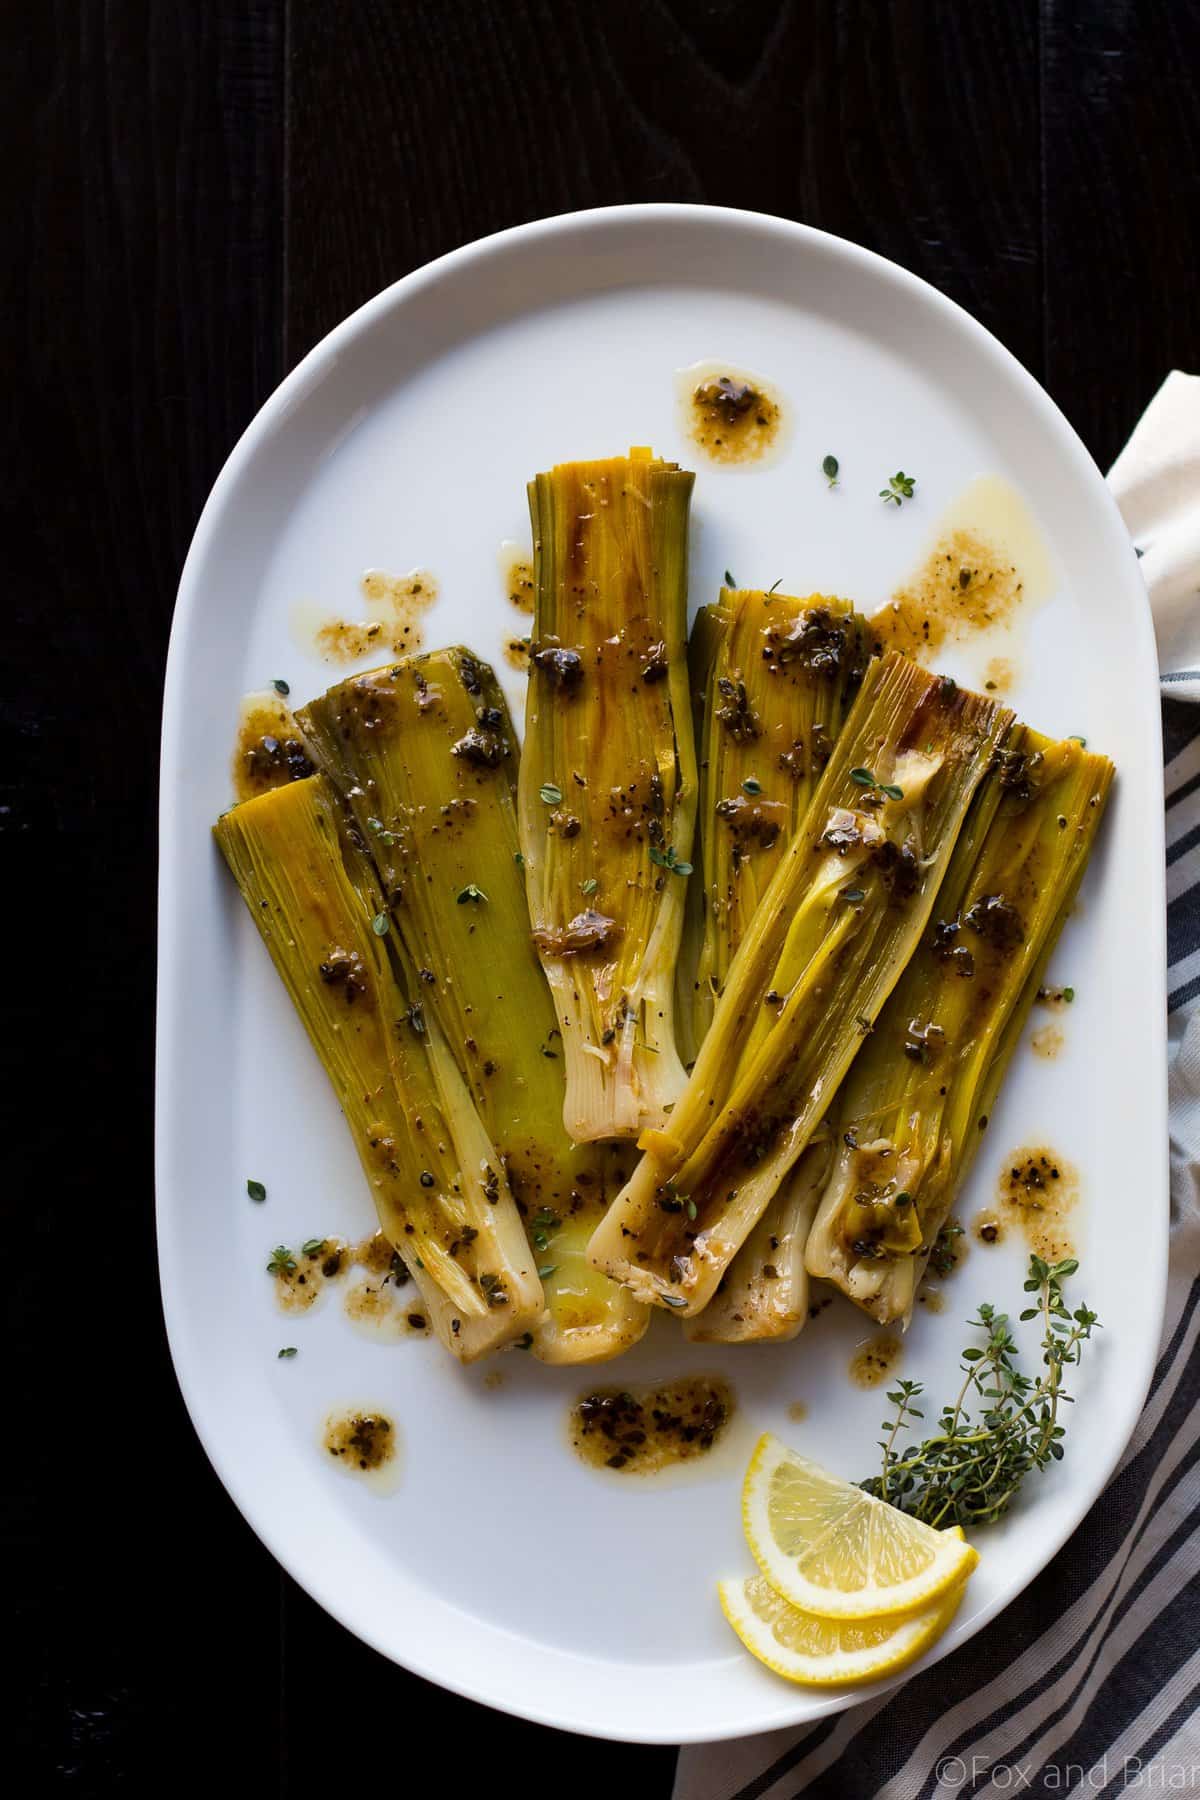 These Braised Leeks make the perfect spring side dish. They have a sweeter, more mild flavor than onions, and are caramelized before being cooked in a butter, white wine and lemon sauce. You and your guests won't be able to stop eating them!